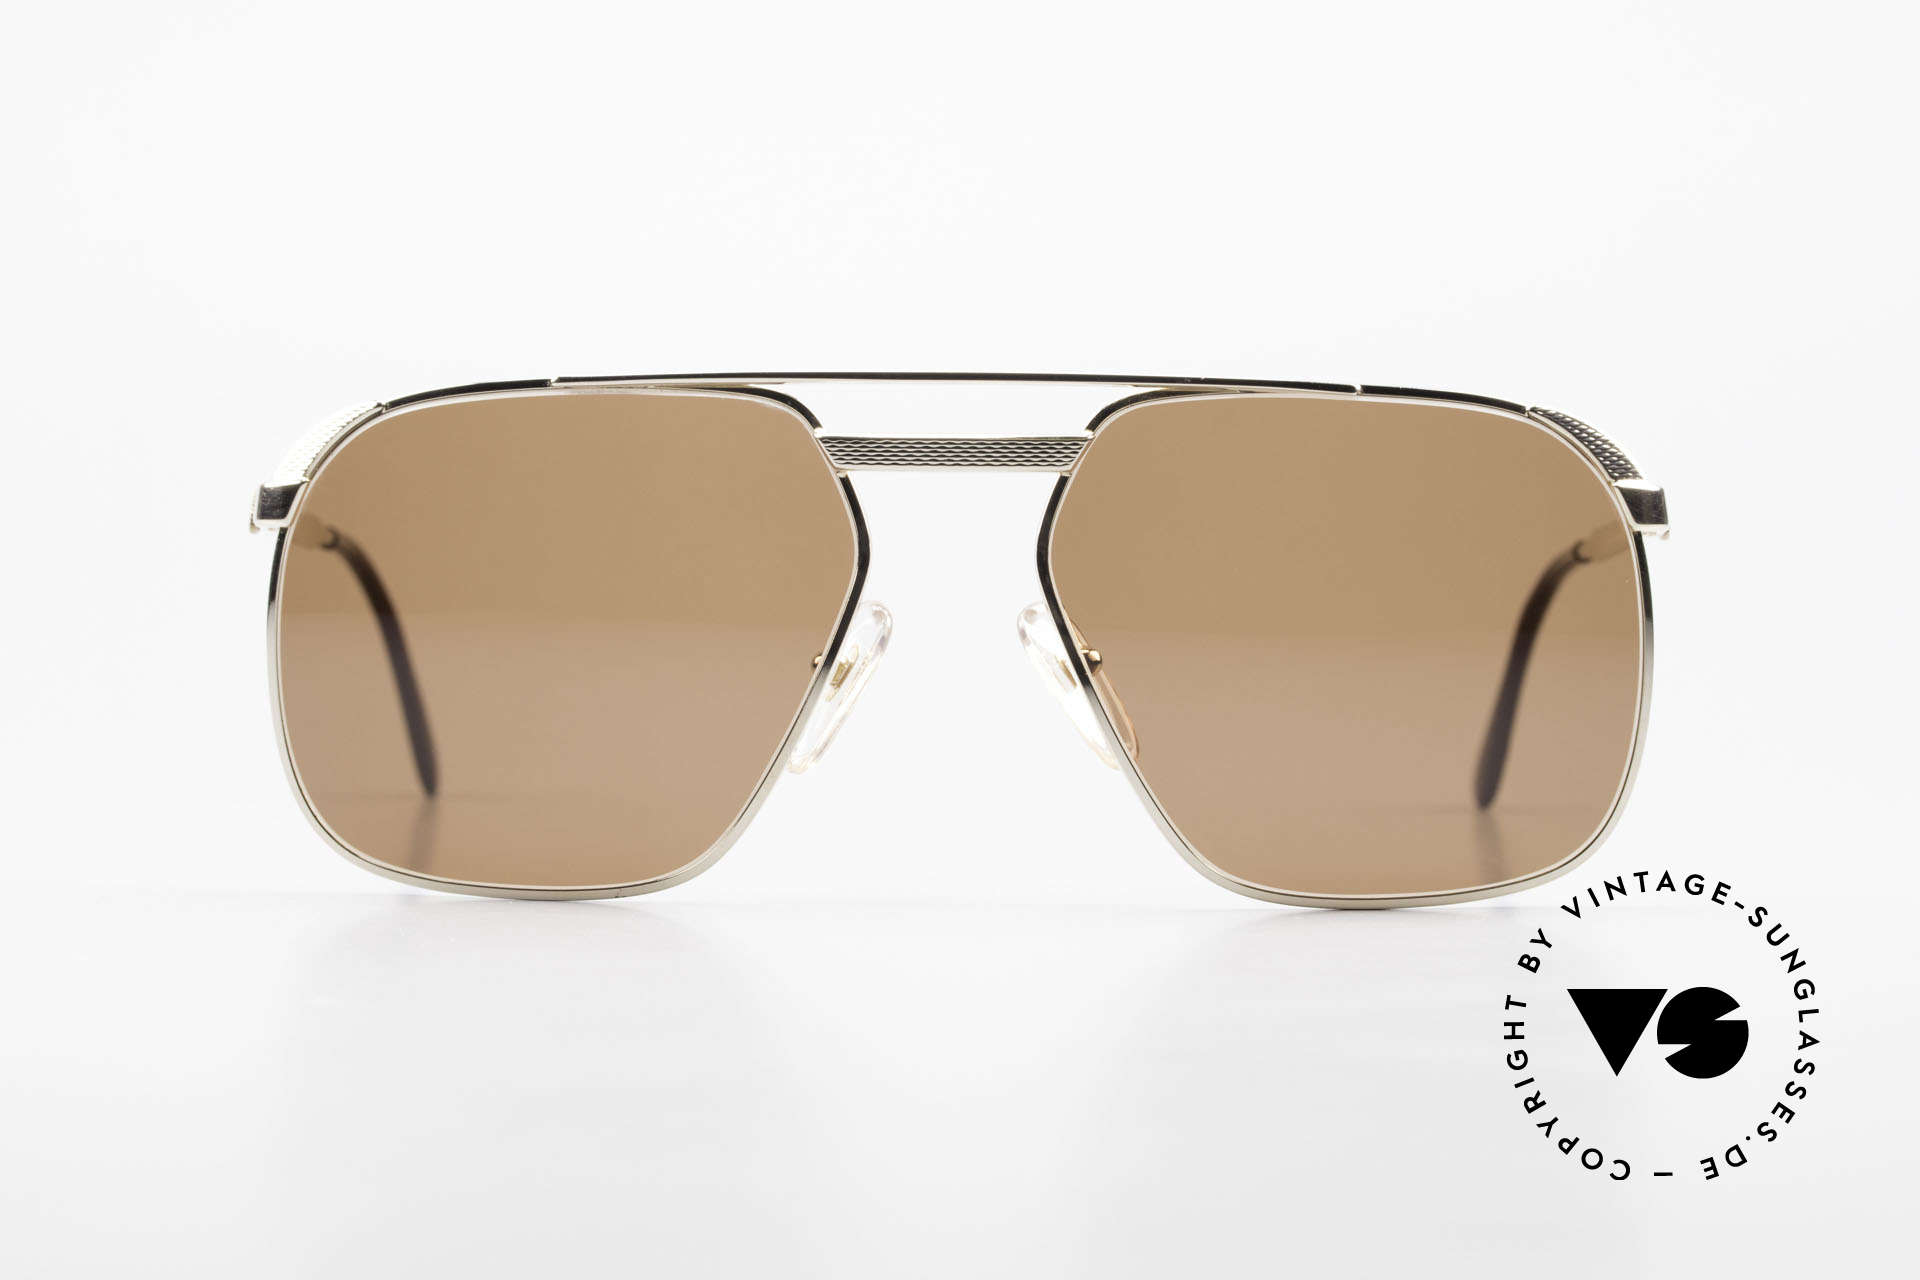 Dunhill 6011 Gold Plated Sunglasses 80's, noble DUNHILL vintage 80's sunglasses for gentlemen, Made for Men